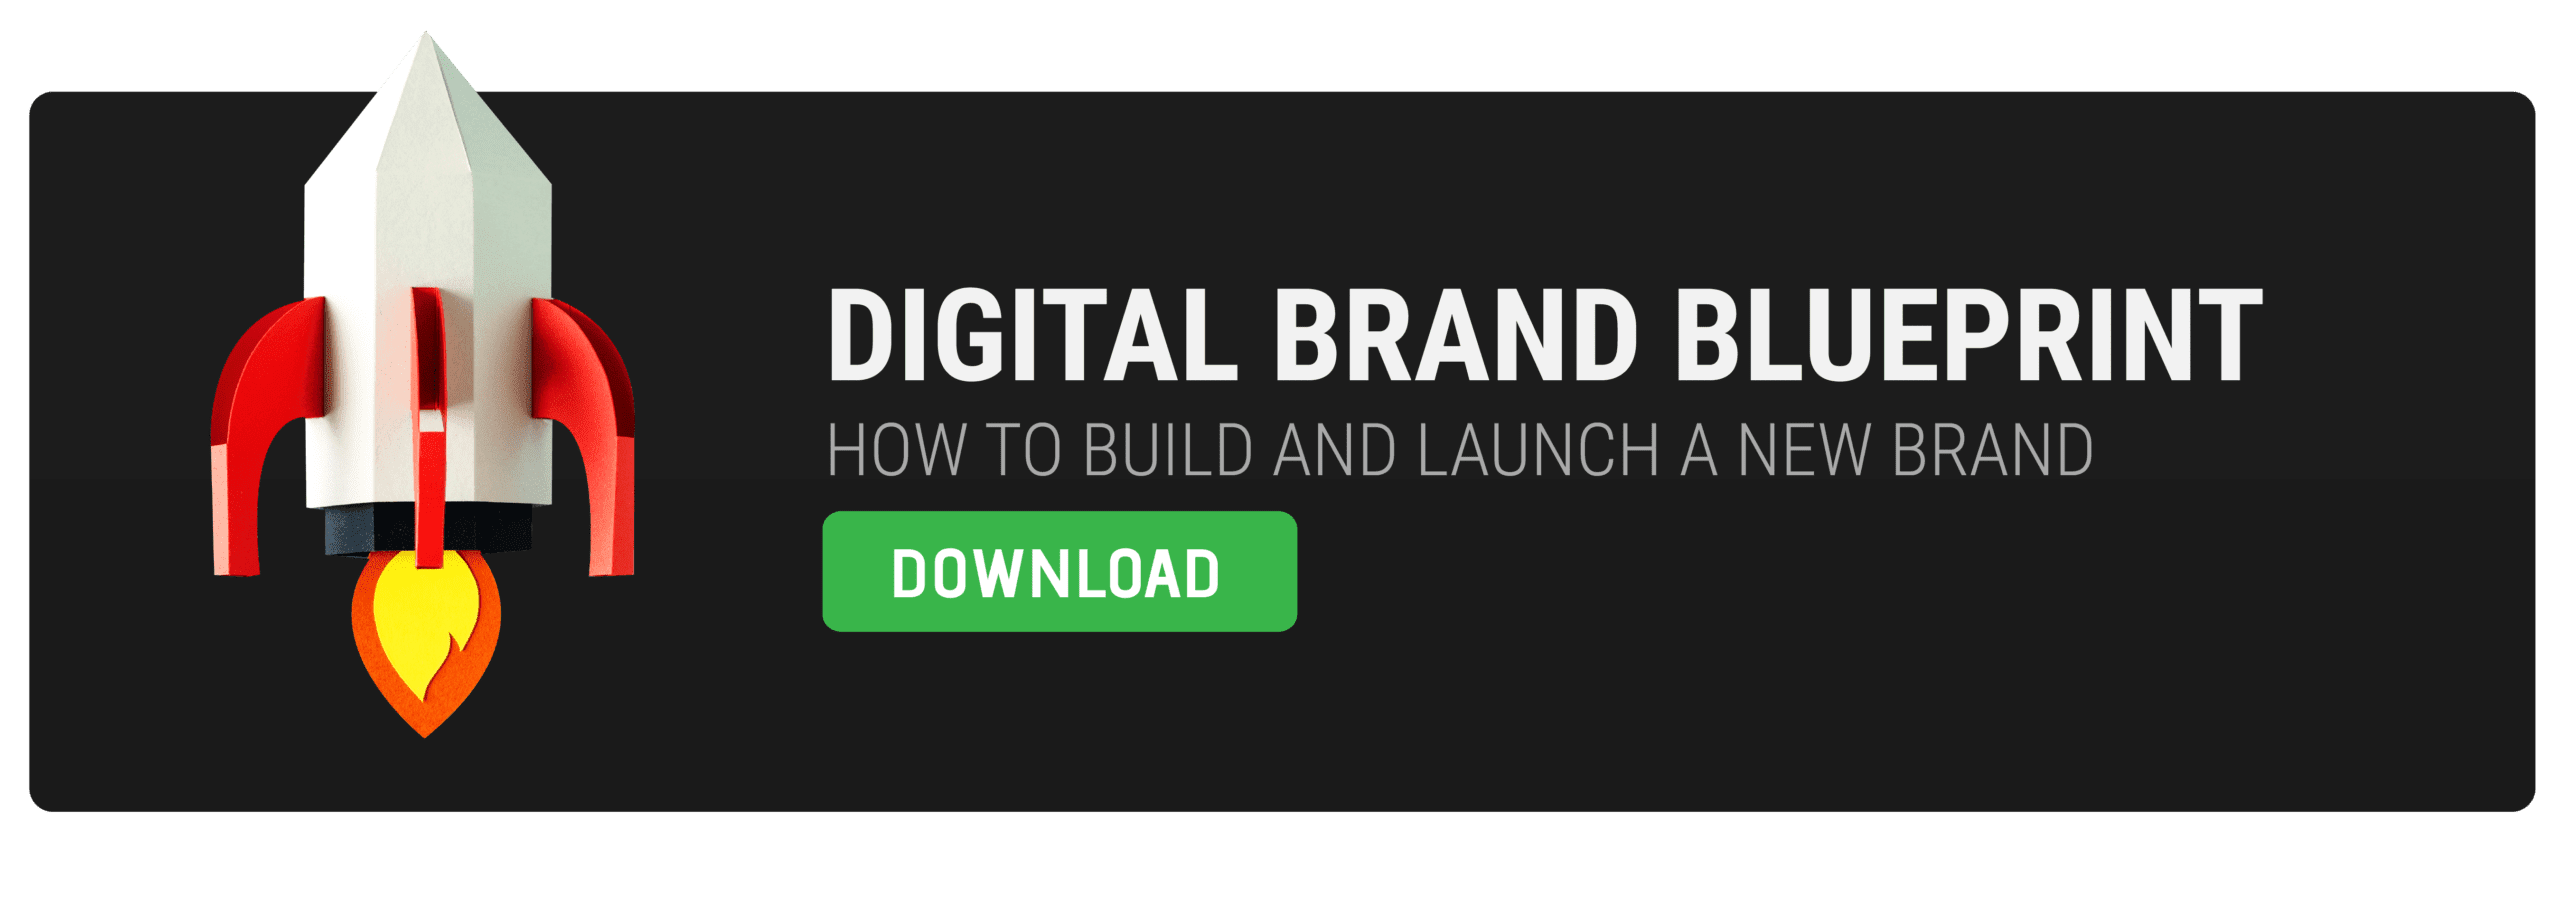 Building A Digital Brand Take A Look Inside The PDF. Download The Digital Branding Guide Banner. 